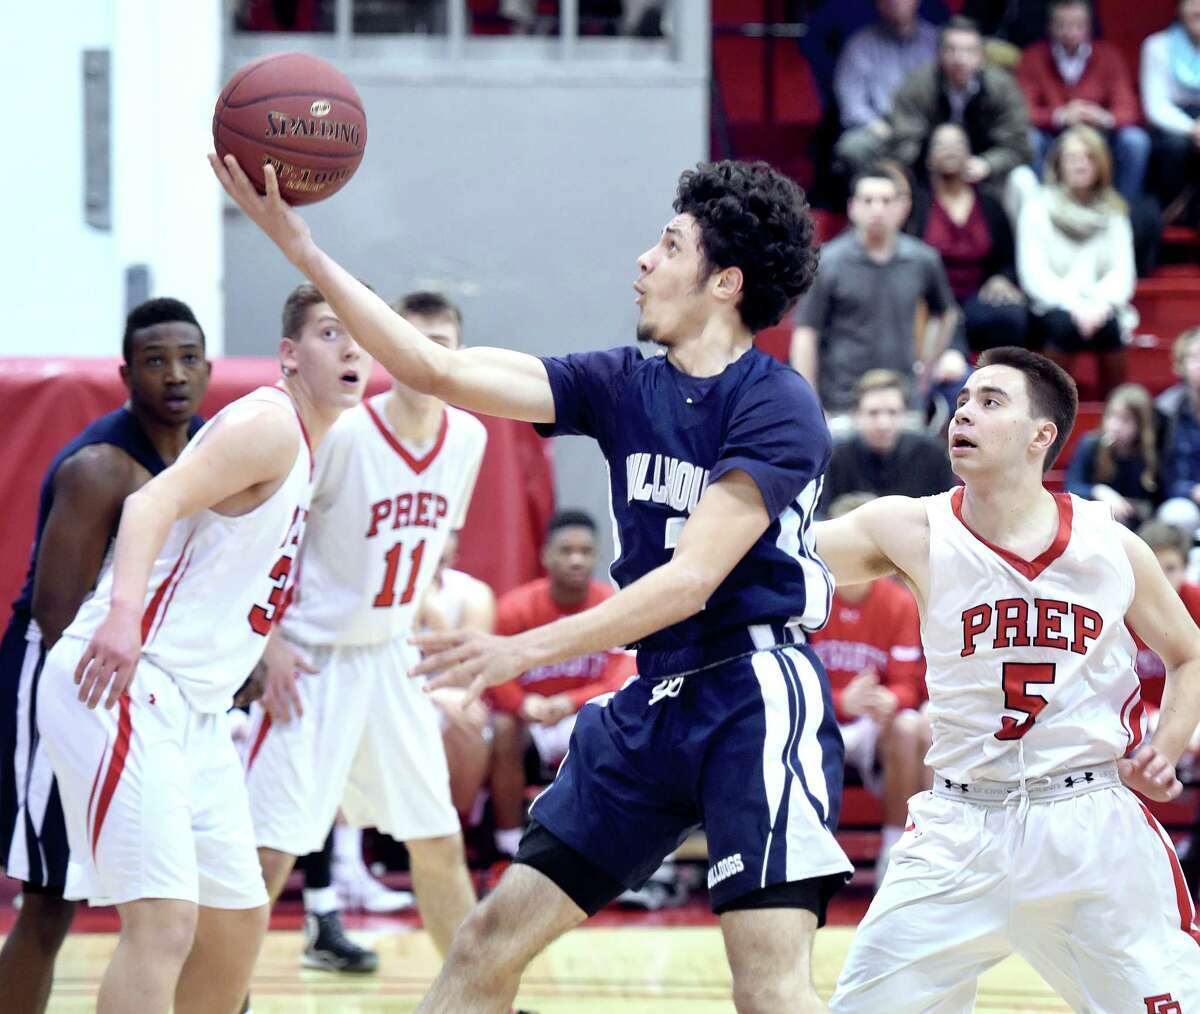 (Arnold Gold-New Haven Register) Joey Kasperzyk (center) of Hillhouse puts up a shot in the first half against Fairfield Prep in Fairfield on 1/29/2016. Hillhosue beat Fairfield Prep 44-40.